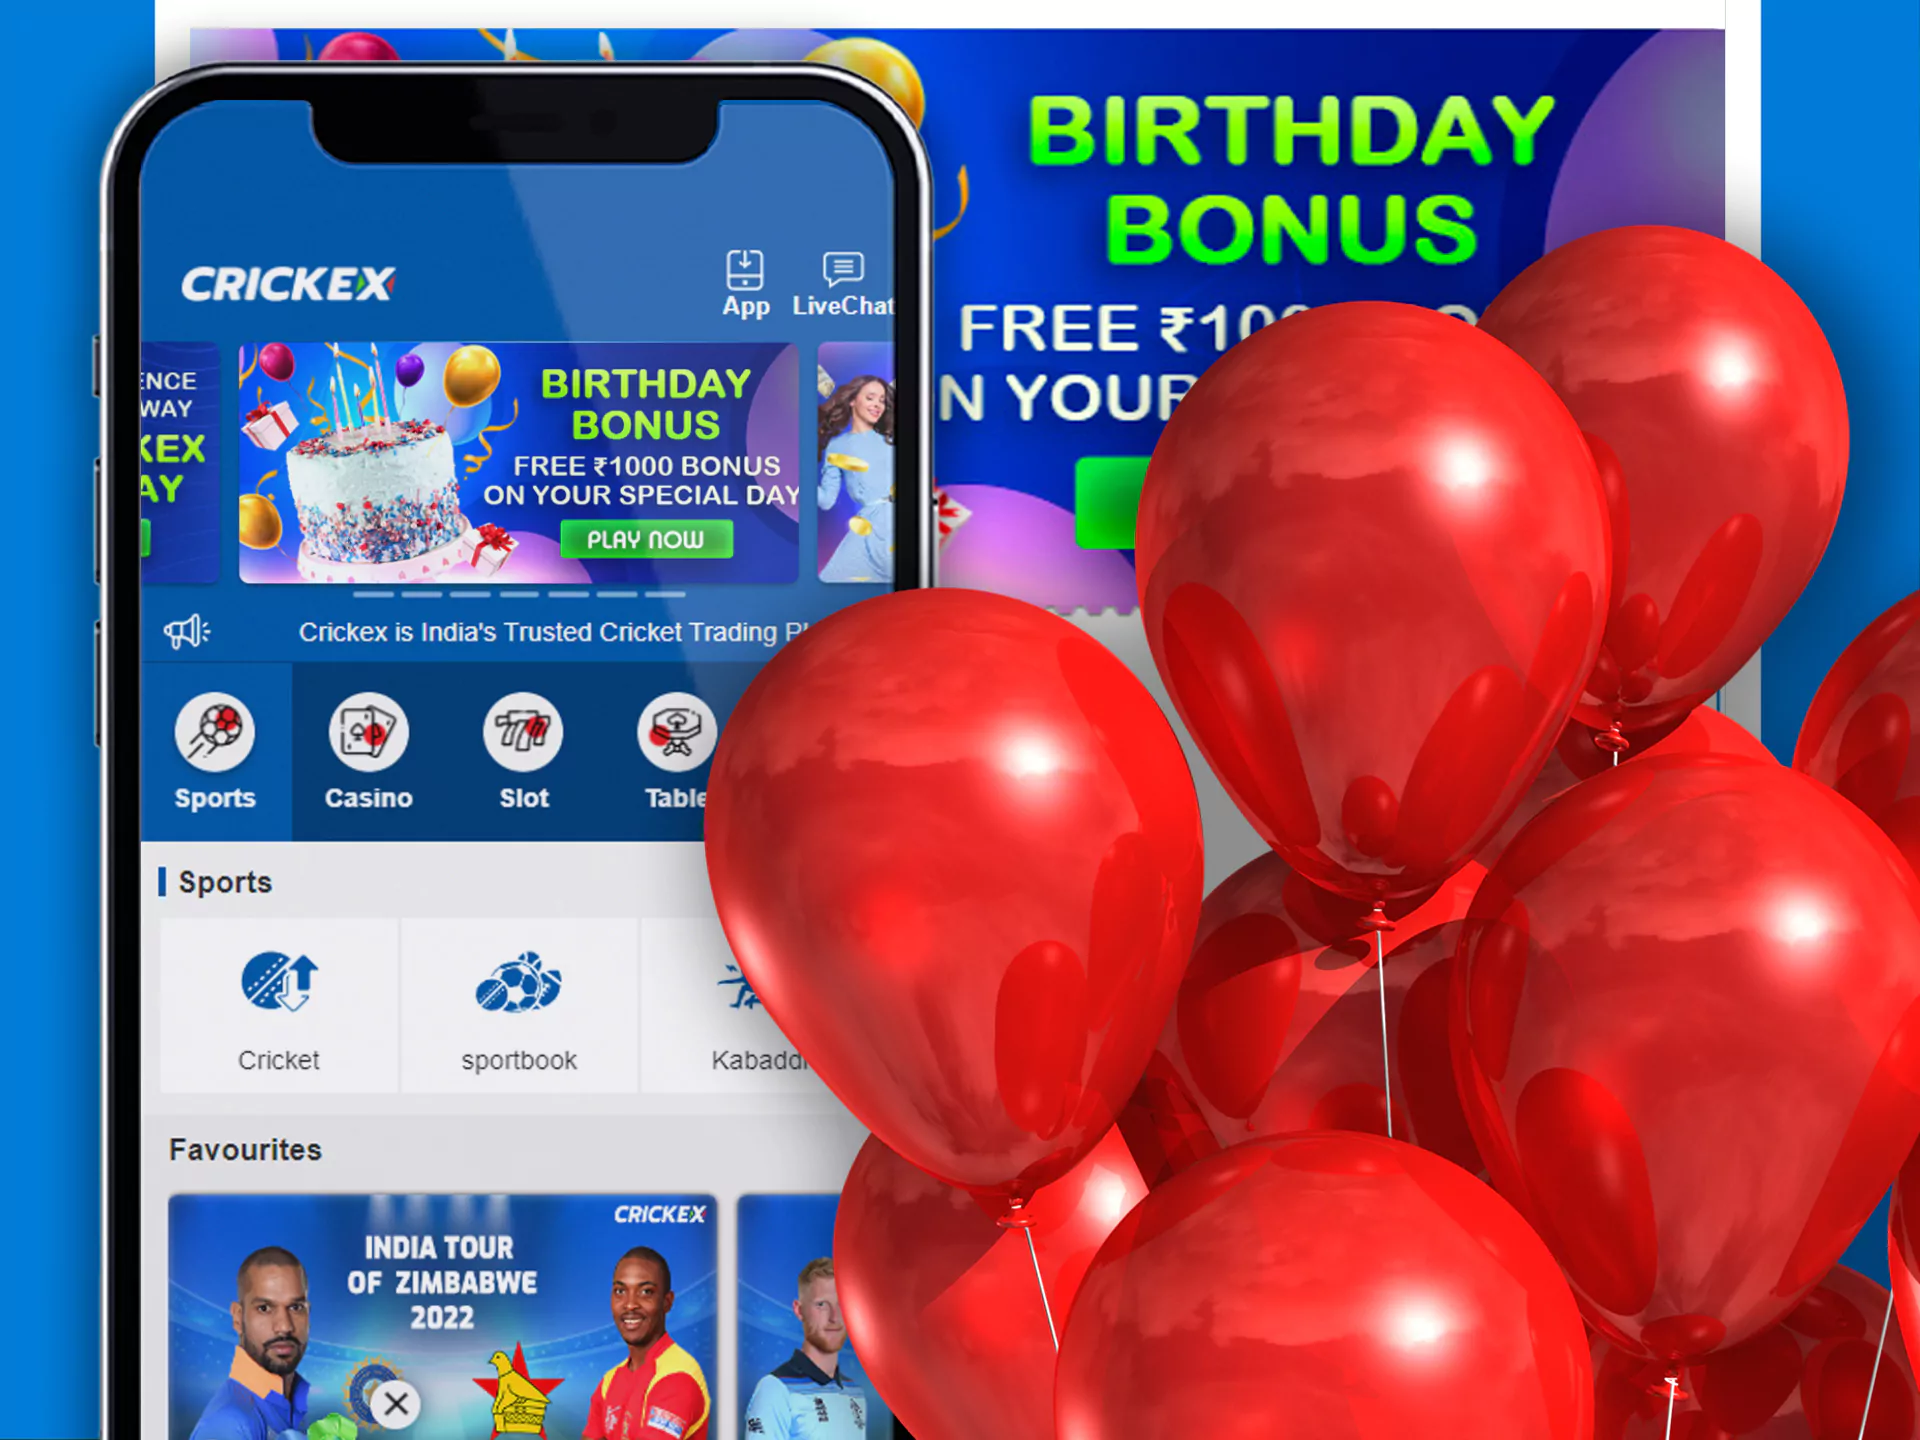 Get an extra bonus from Crickex for your birthday.